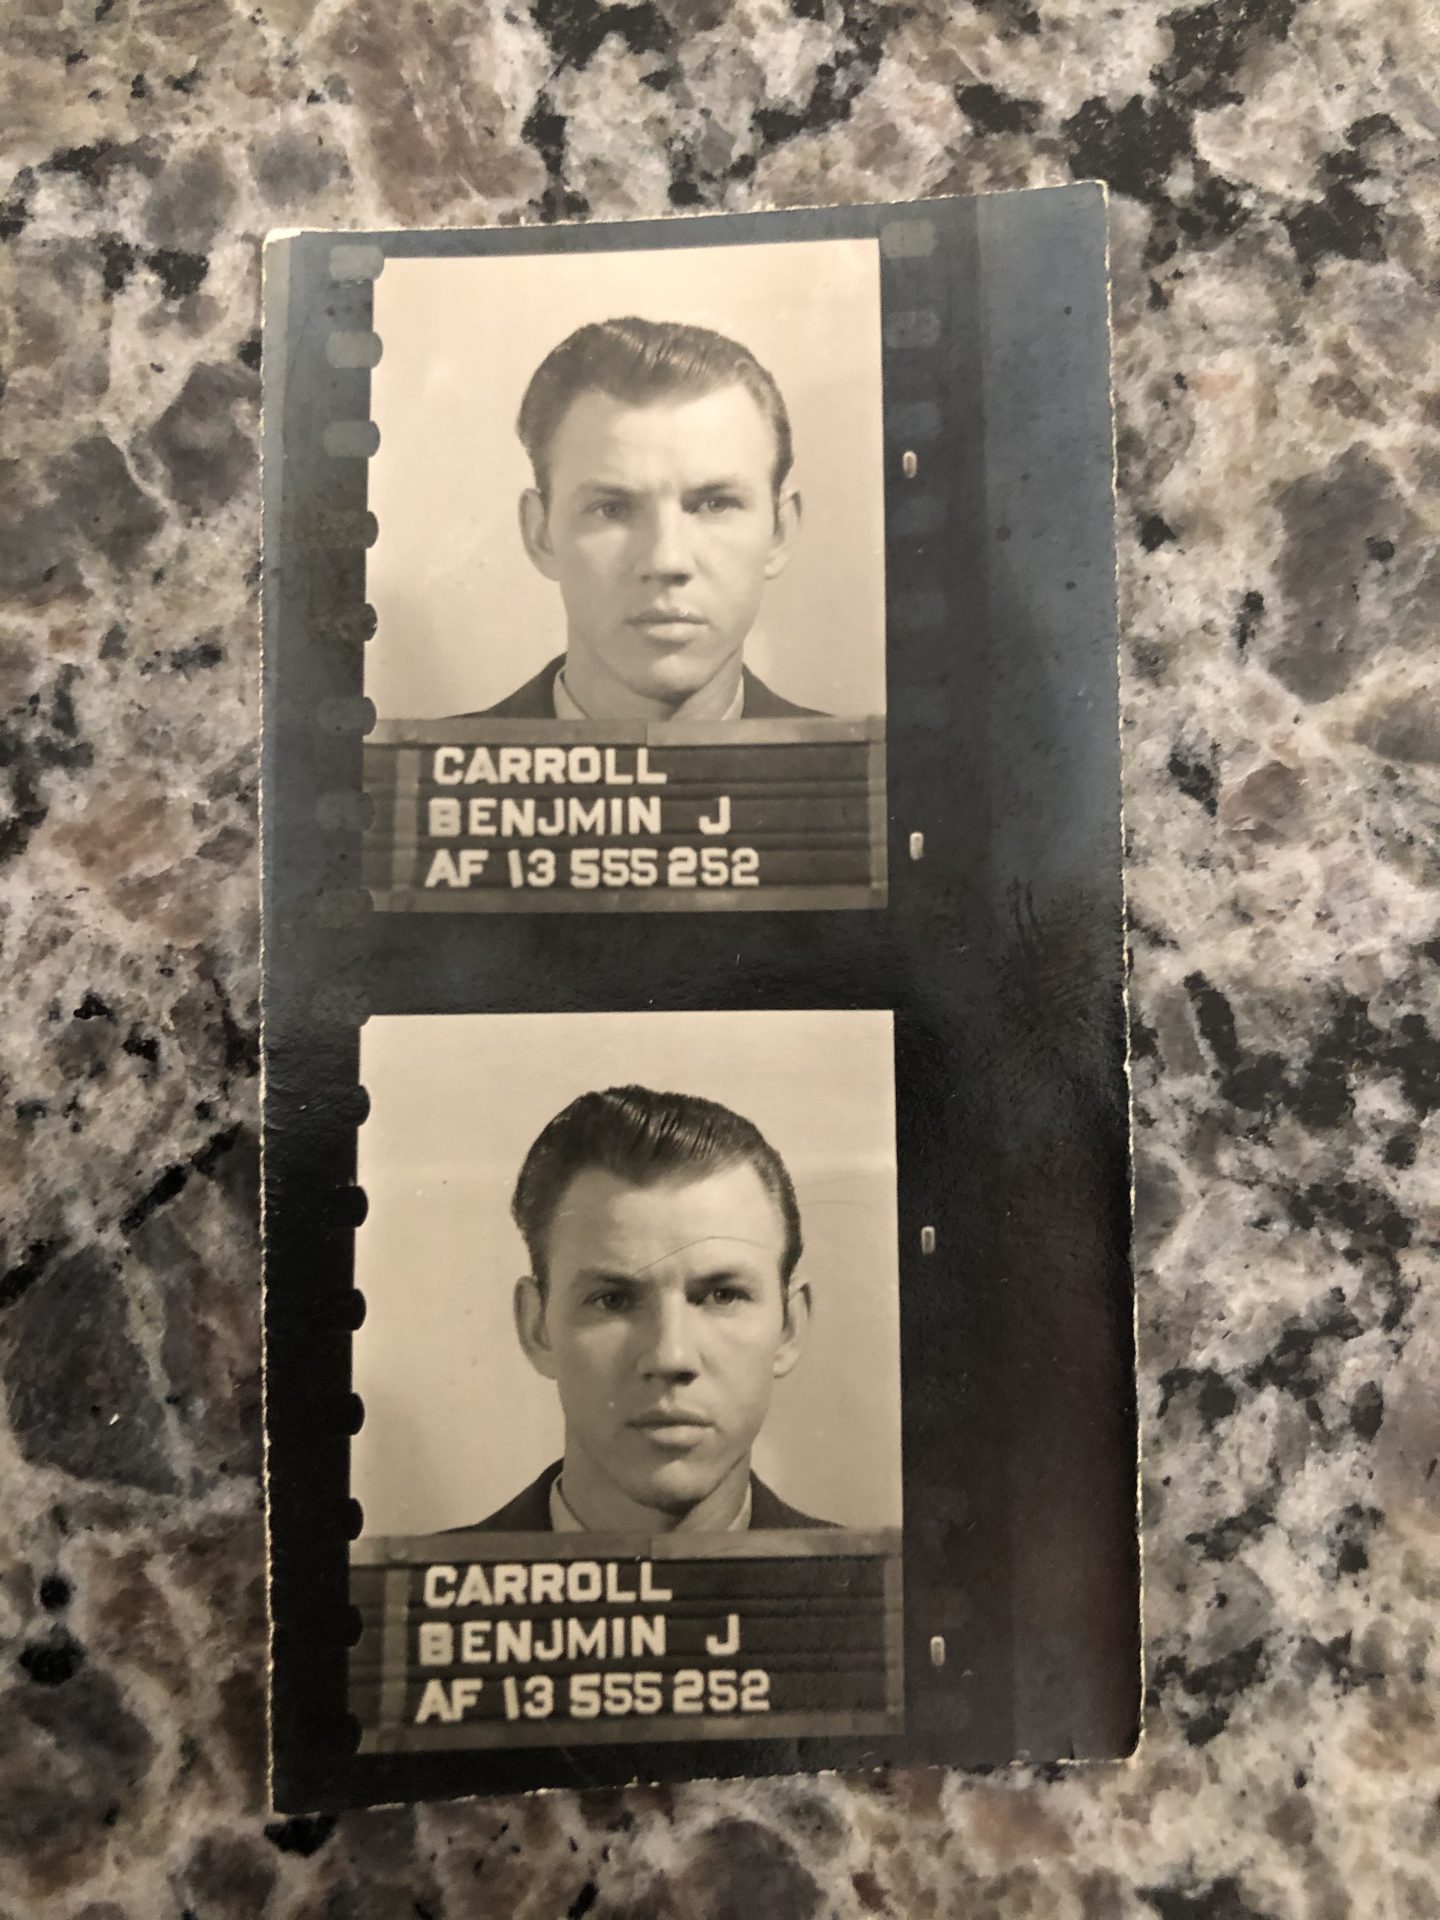 Dads Air Force passport photos I believe. Probably 1956 , 19 years old.GQRE